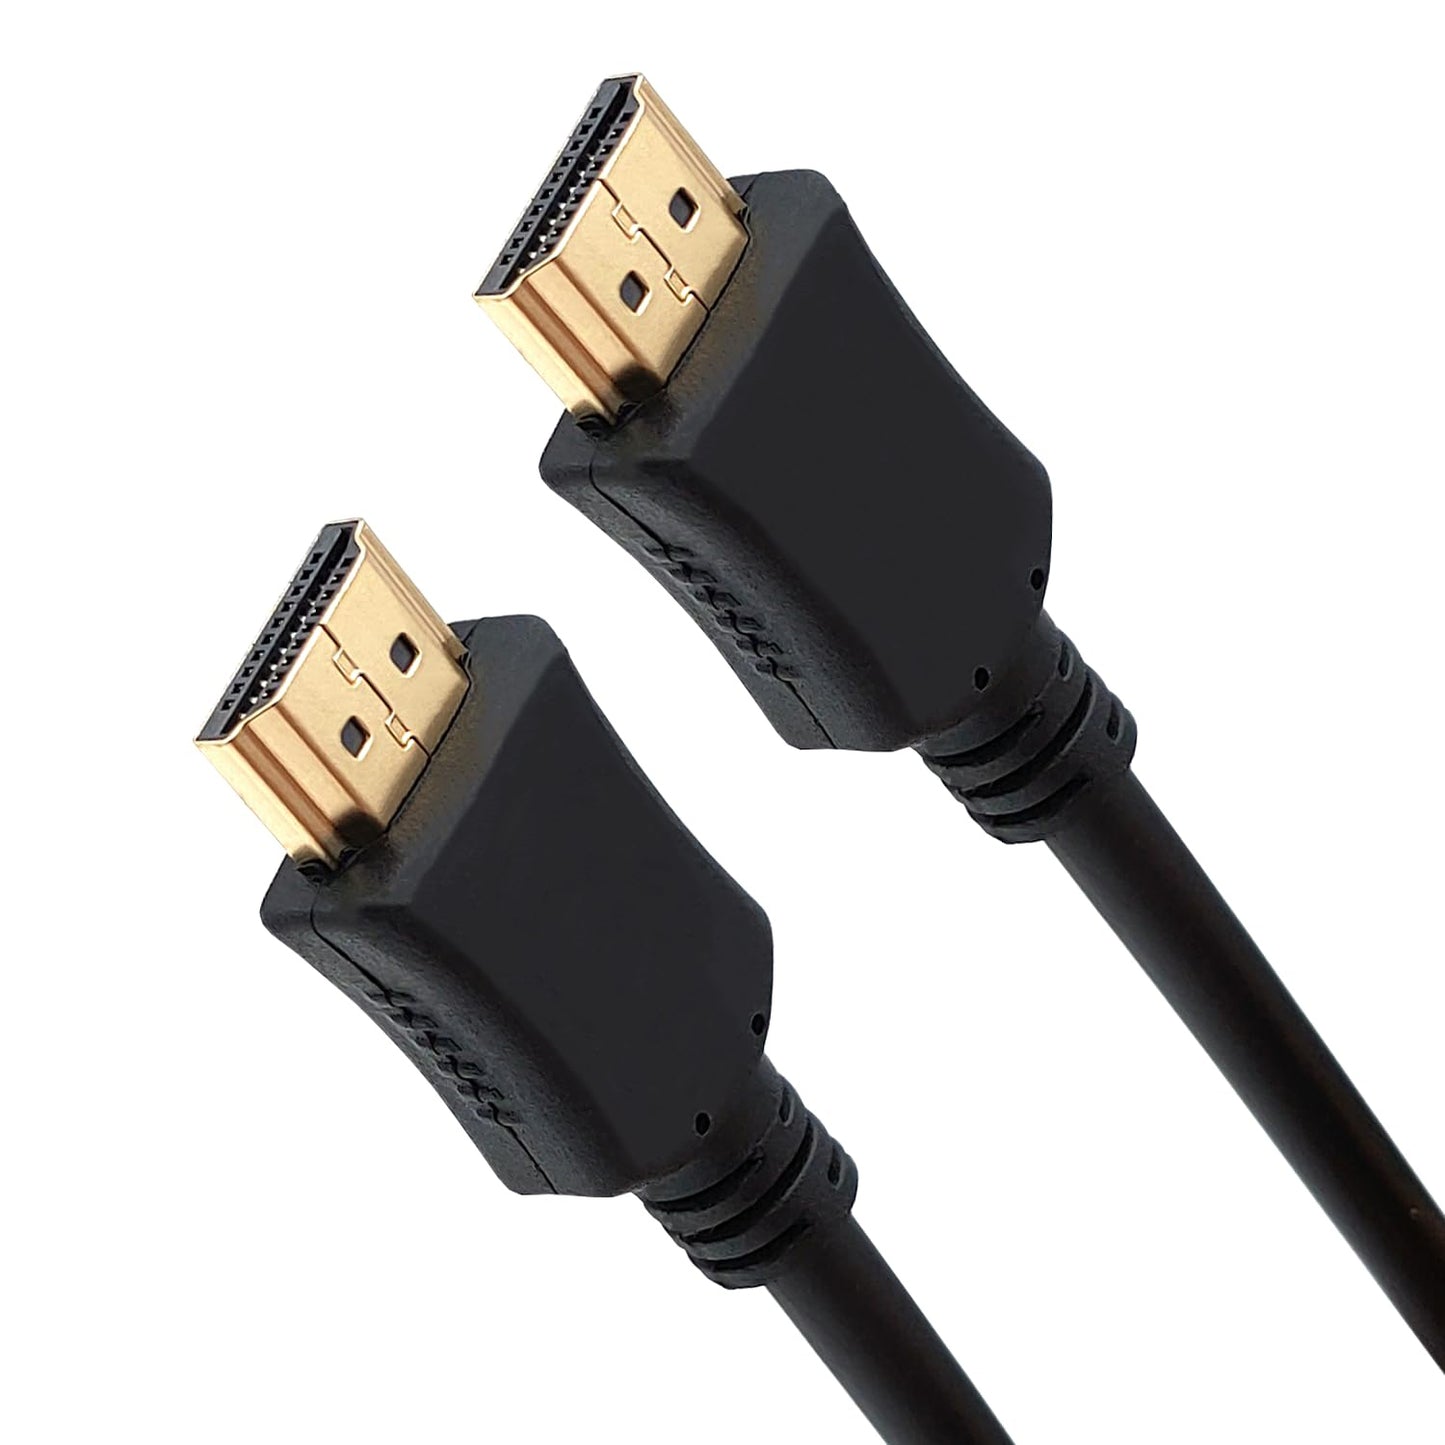 GBC 2 Meter HDMI Cable, Supports 4K UHD at 60Hz, High Speed ​​18Gbps with Ethernet, Gold-Plated Connectors